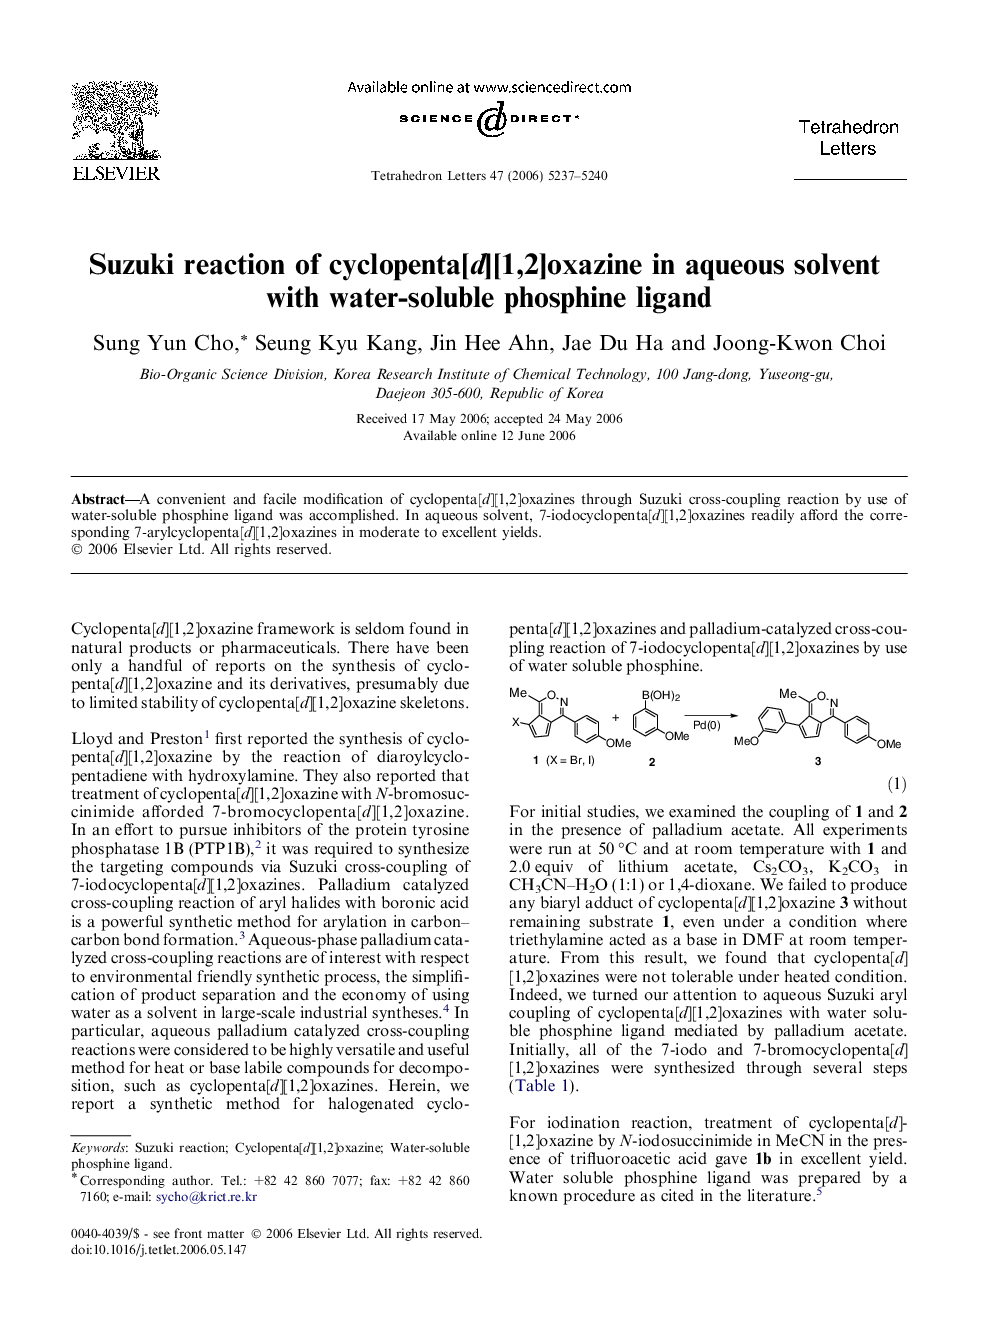 Suzuki reaction of cyclopenta[d][1,2]oxazine in aqueous solvent with water-soluble phosphine ligand